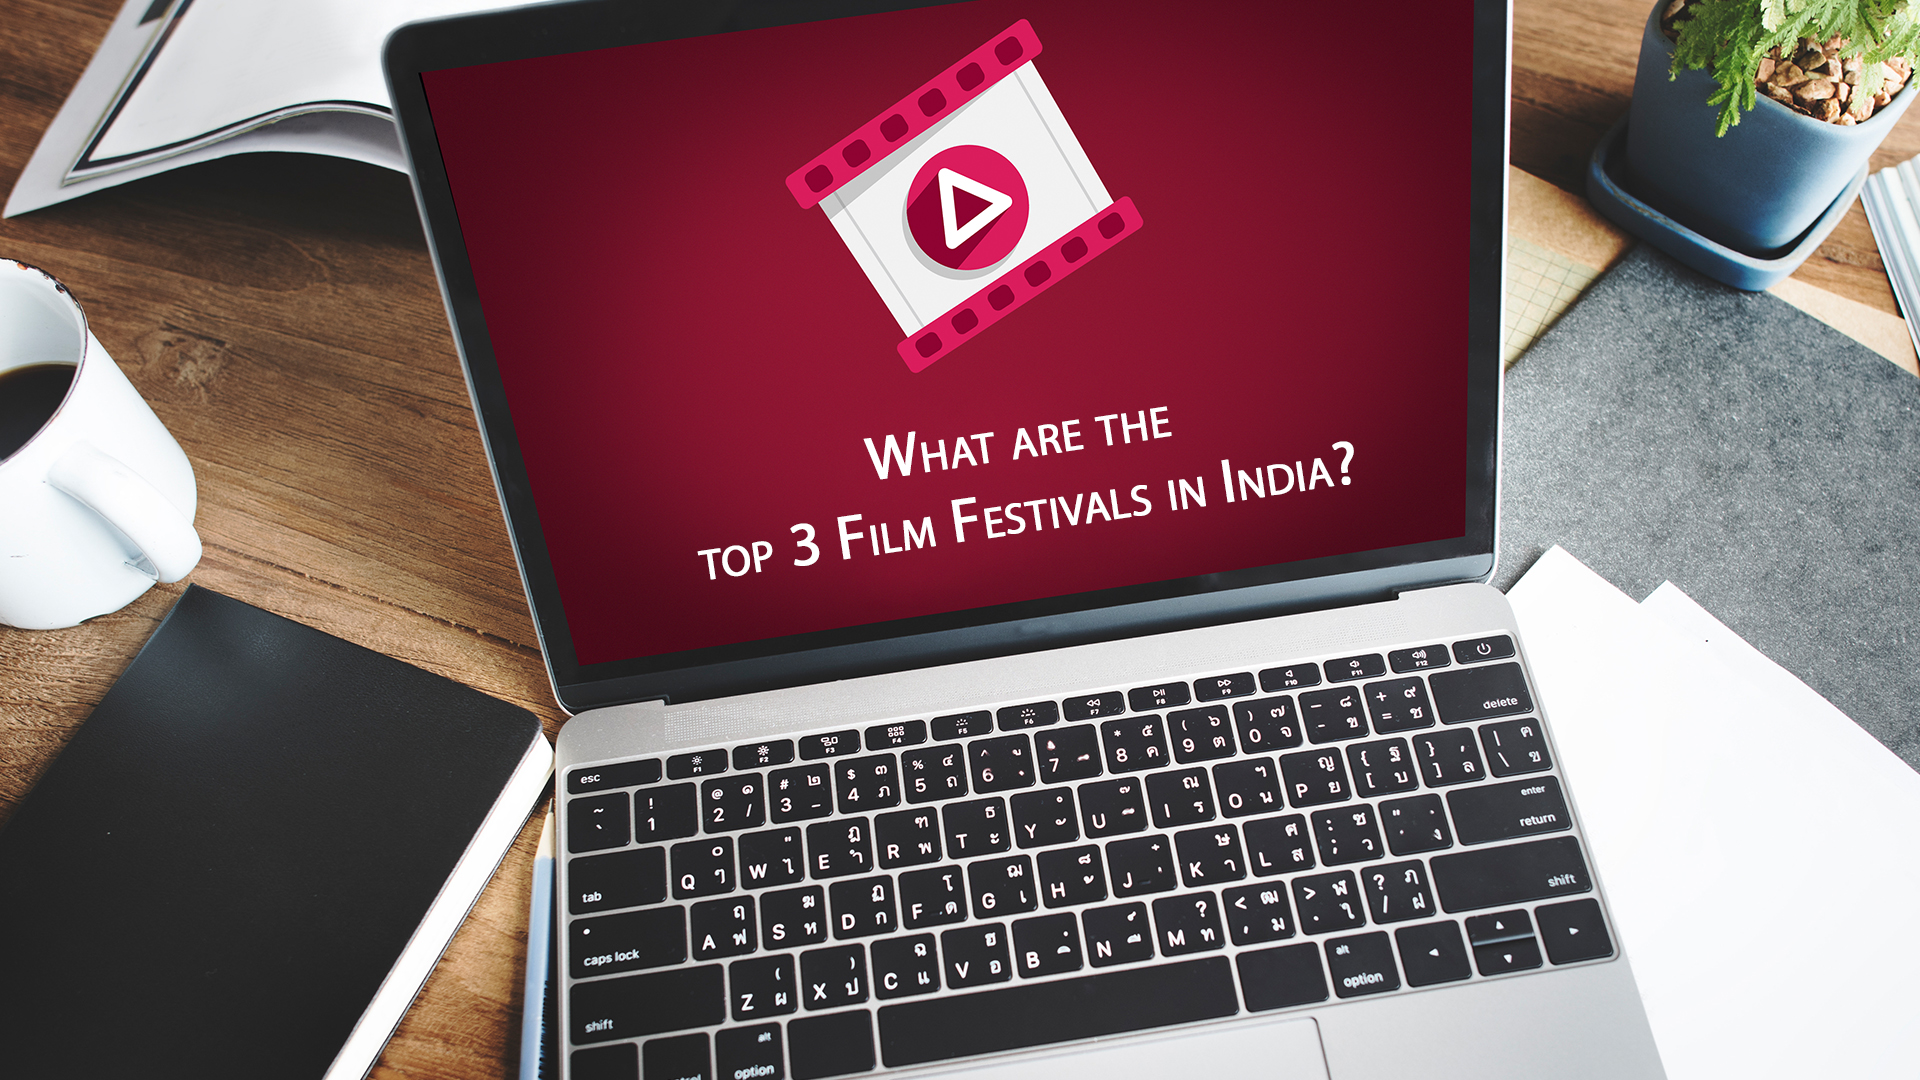 What are the top 3 Film Festivals in India?